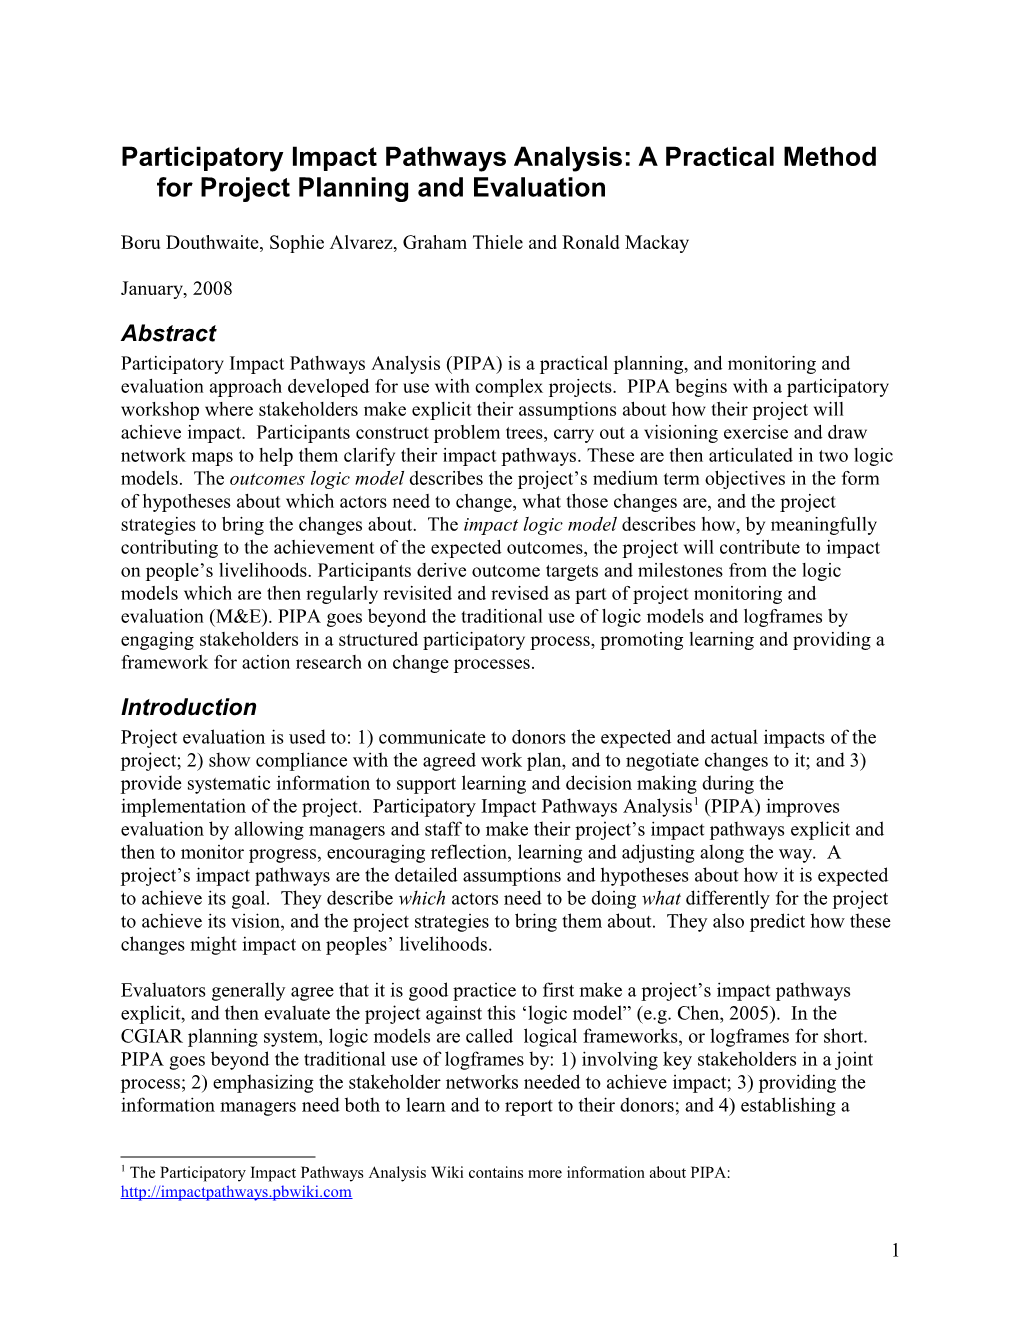 Participatory Impact Pathways Analysis: A Practical Method For Project Planning And Evaluation